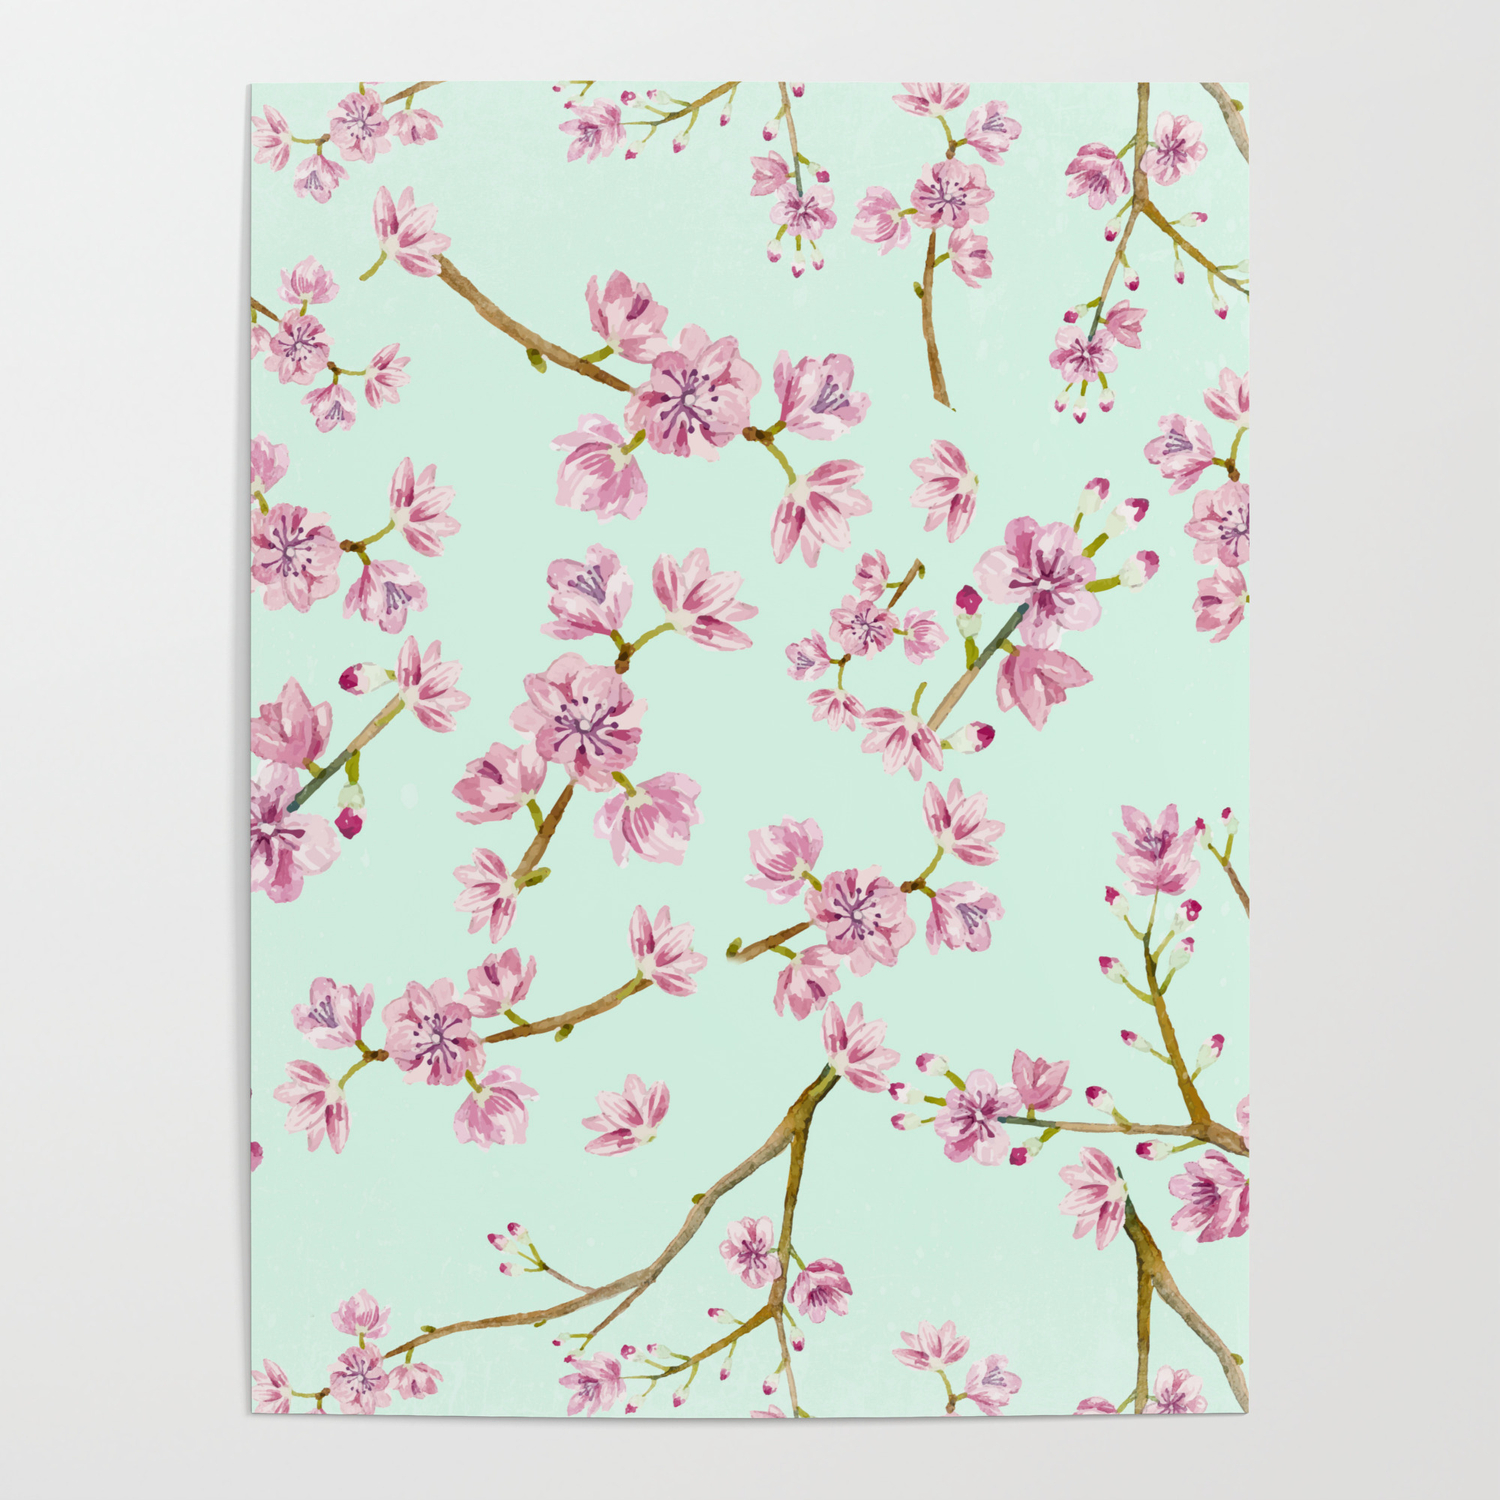 Spring Flowers Mint And Pink Cherry Blossom Pattern Poster By Better Home Society6